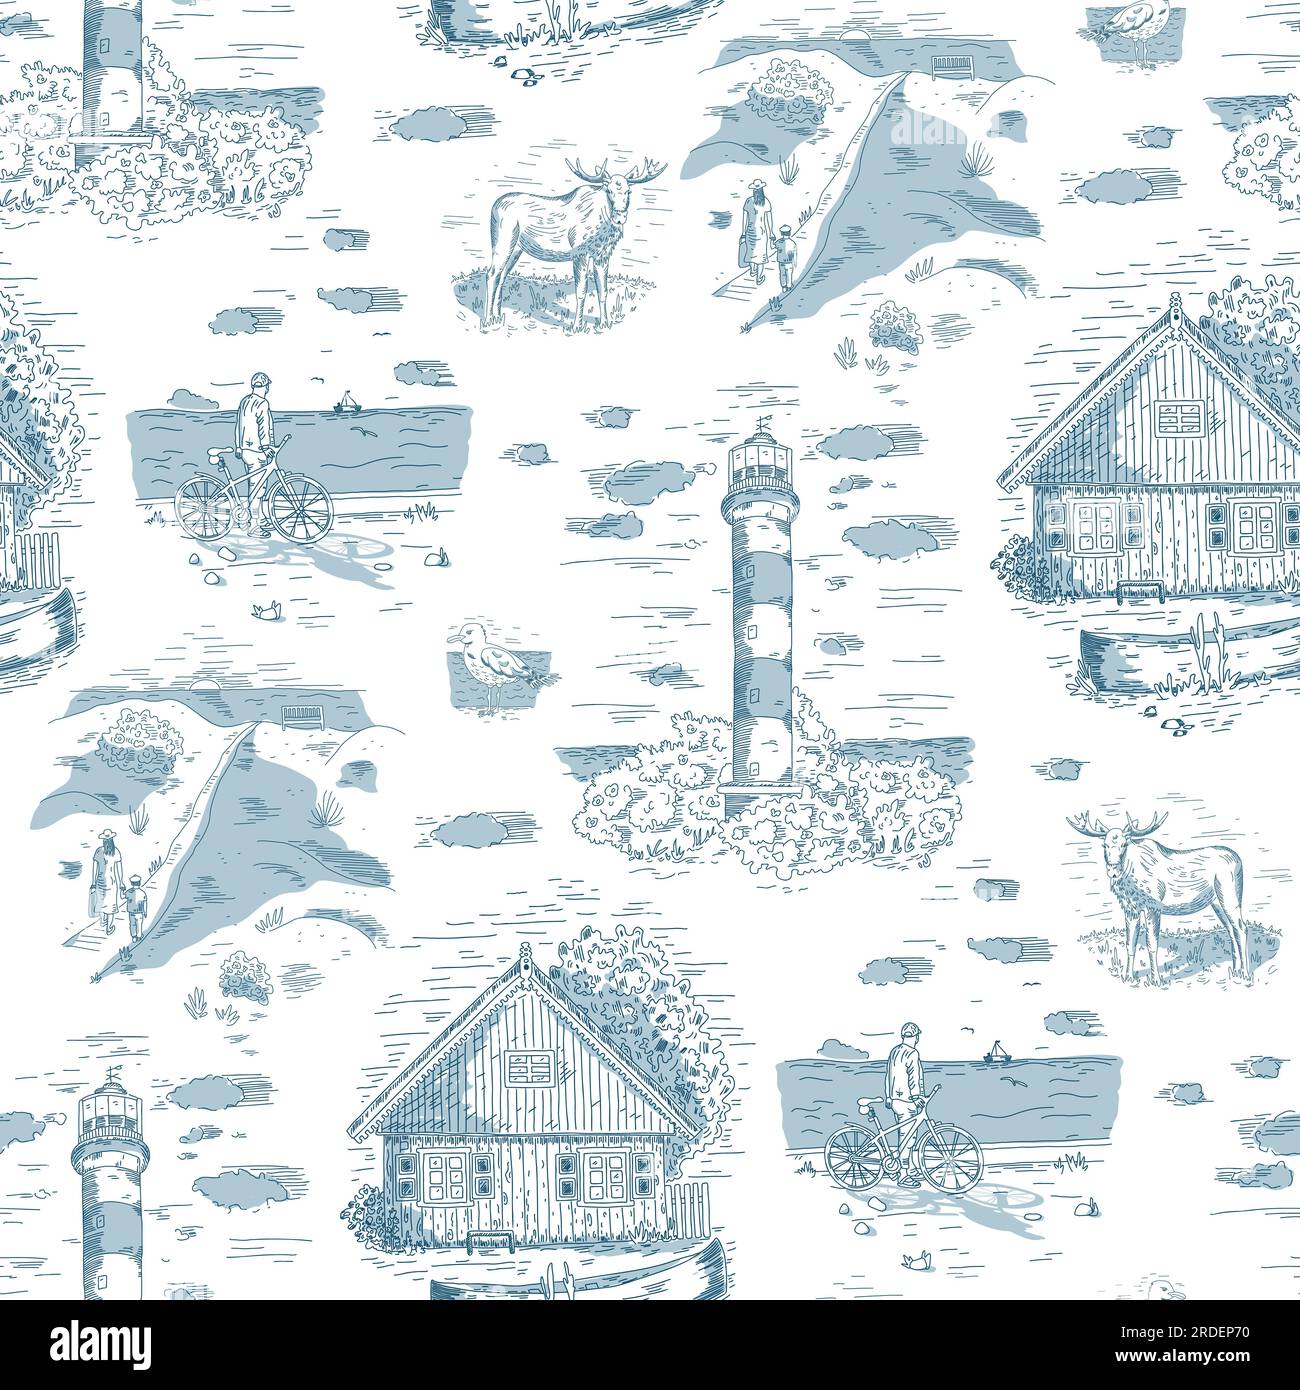 Toile de Jouy seamless pattern in blue colour. Small village by the sea compositions.  Stock Vector